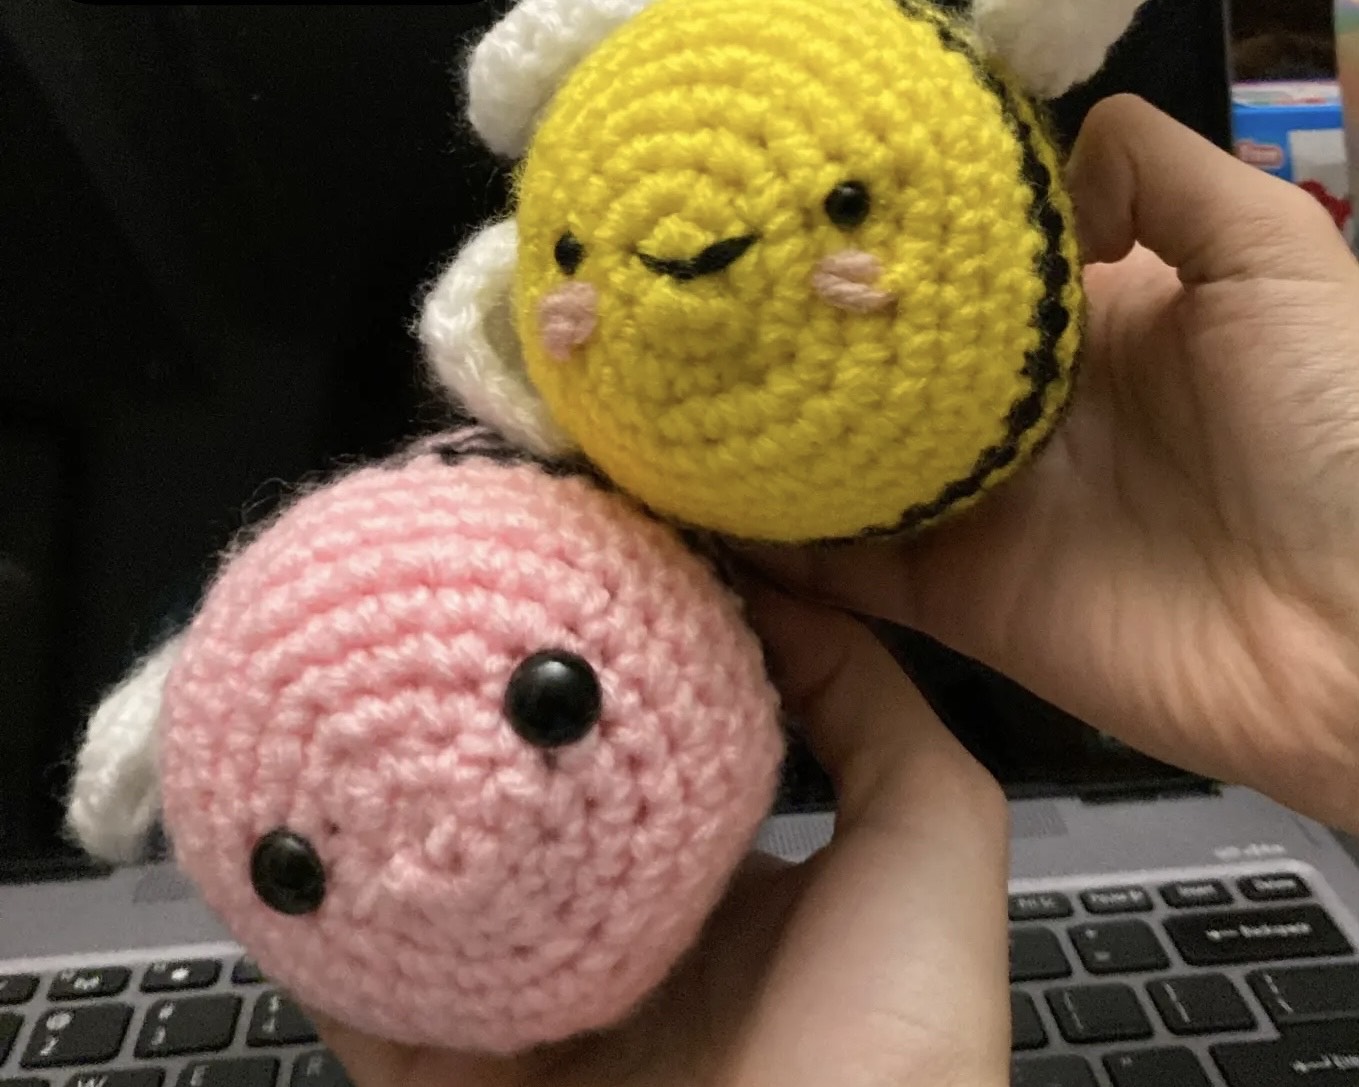 Two hands hold two crochet bees, one pink and one yellow.